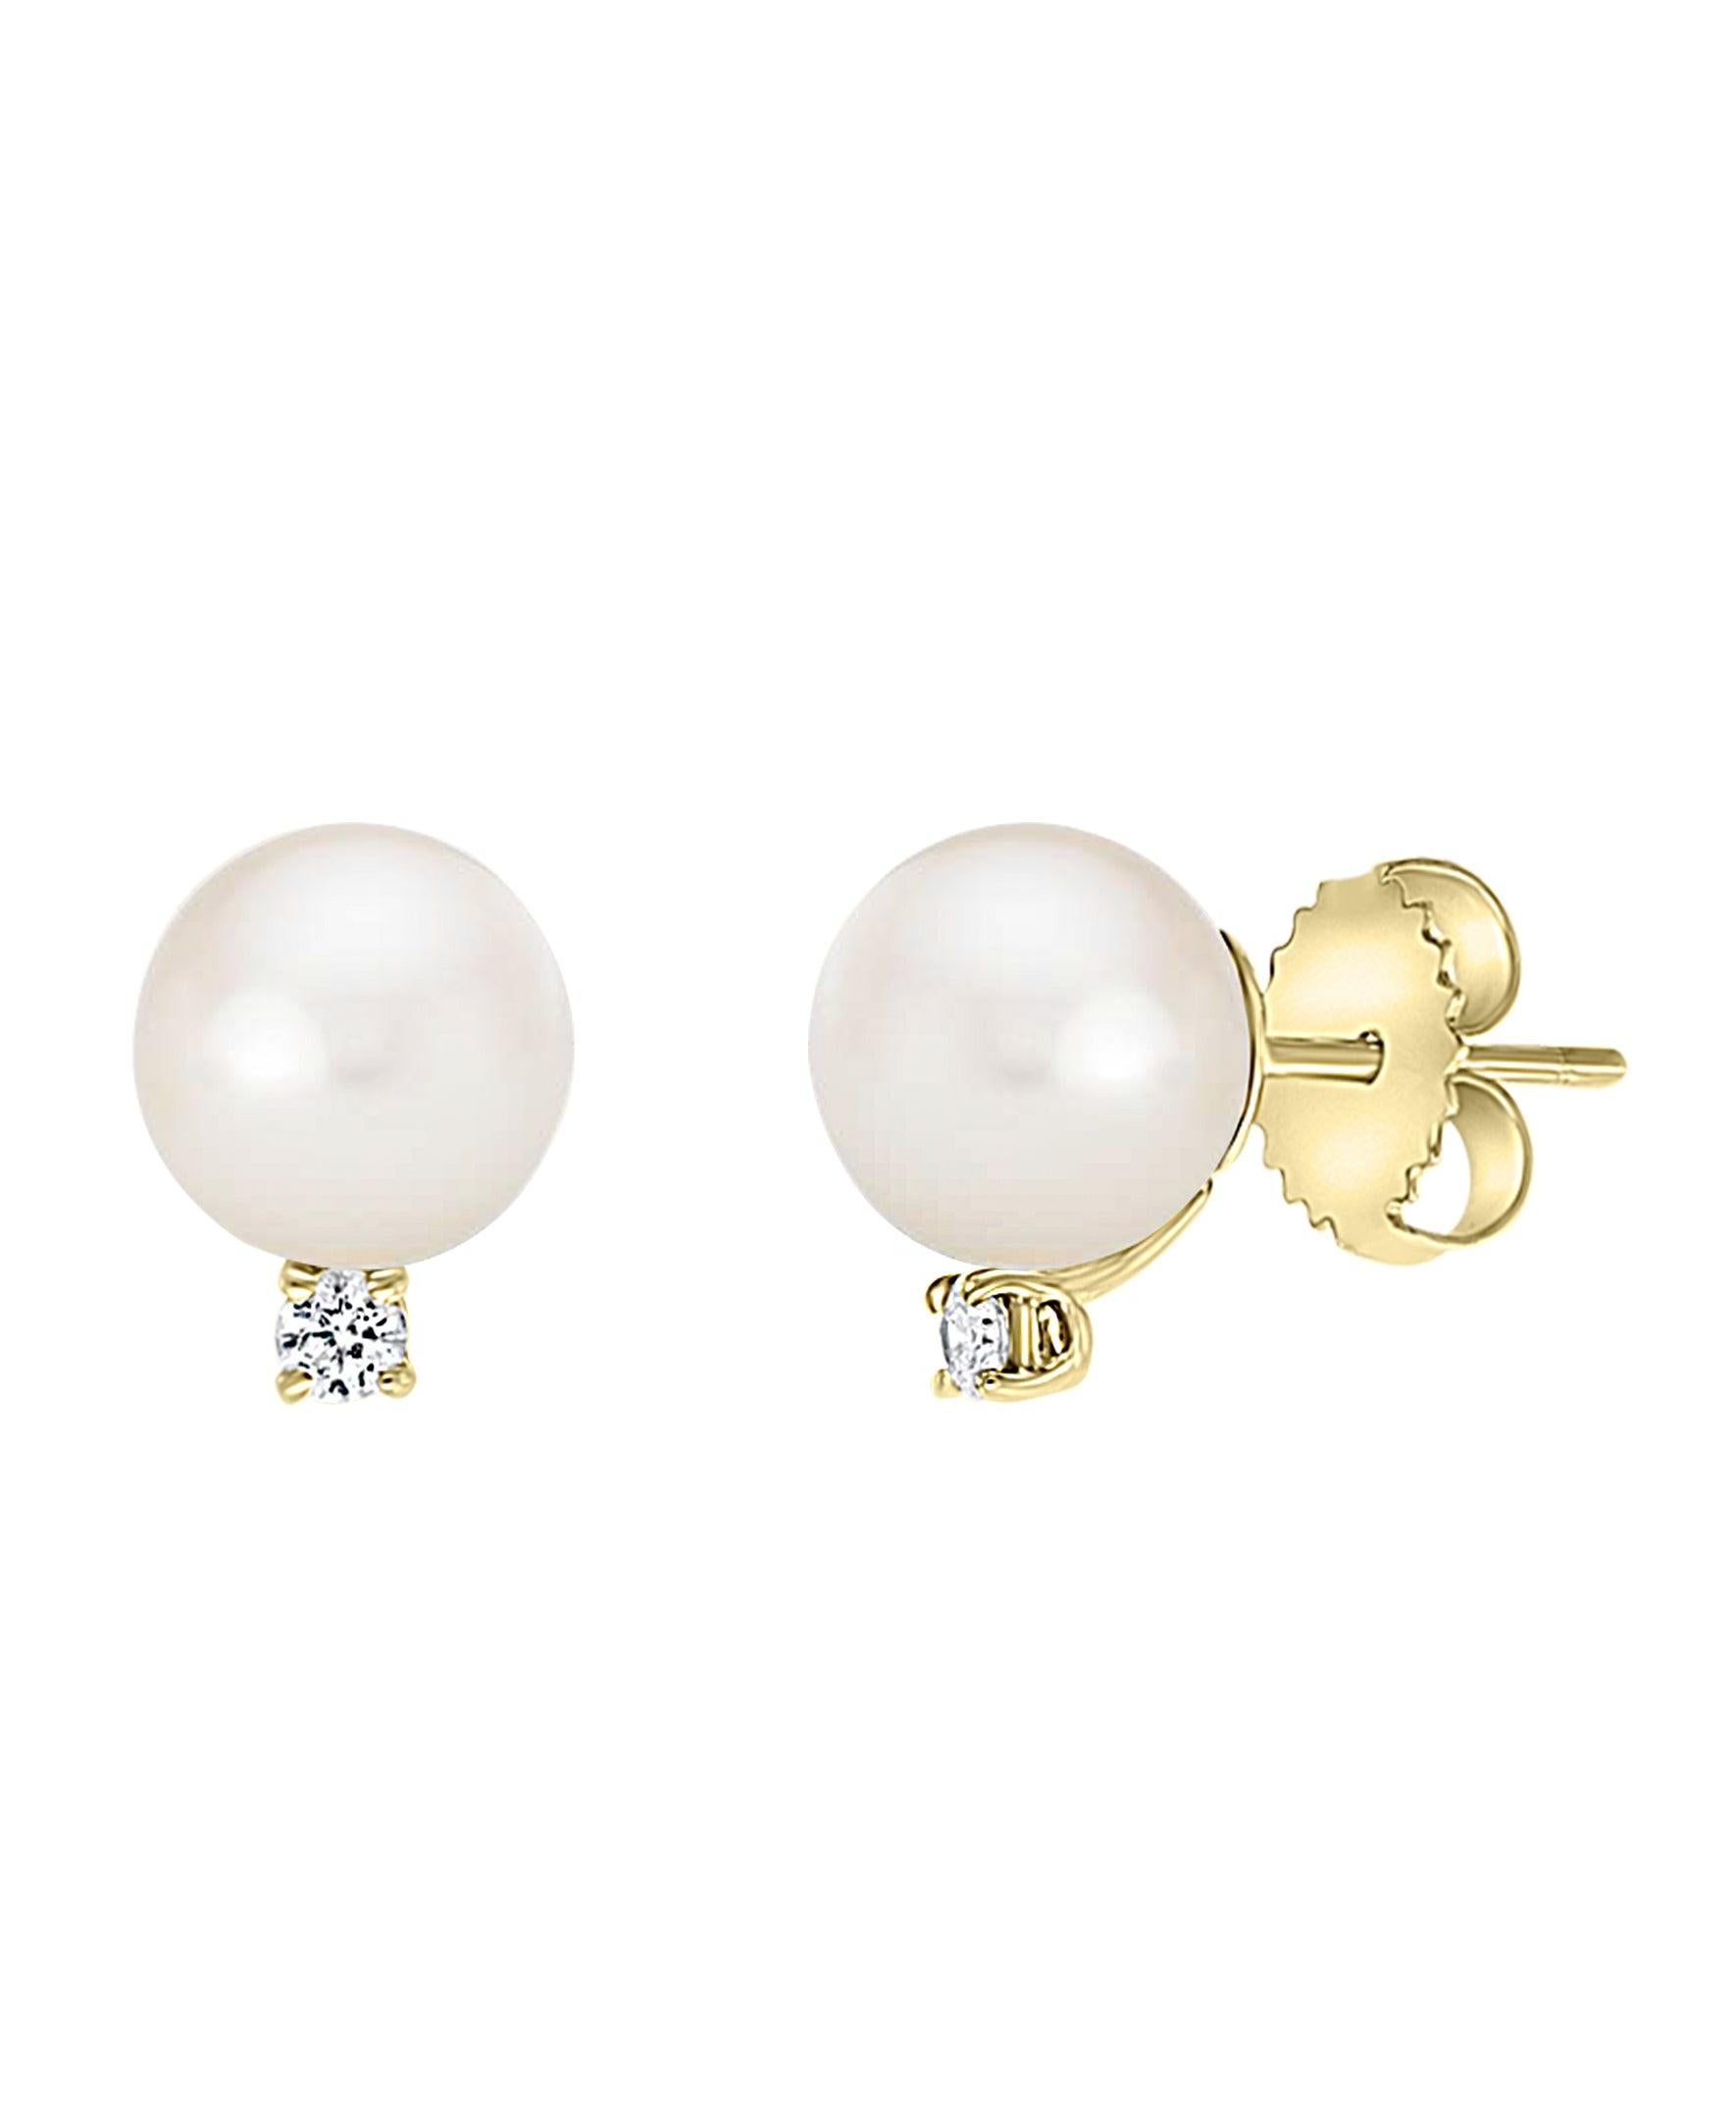 These elegant stud earrings feature Japanese Akoya cultured pearls set above sparkling diamonds in yellow gold. This sharp yet contemporary look makes the perfect complement to your work outfit or for a night out on the town.
- 14K yellow gold
-